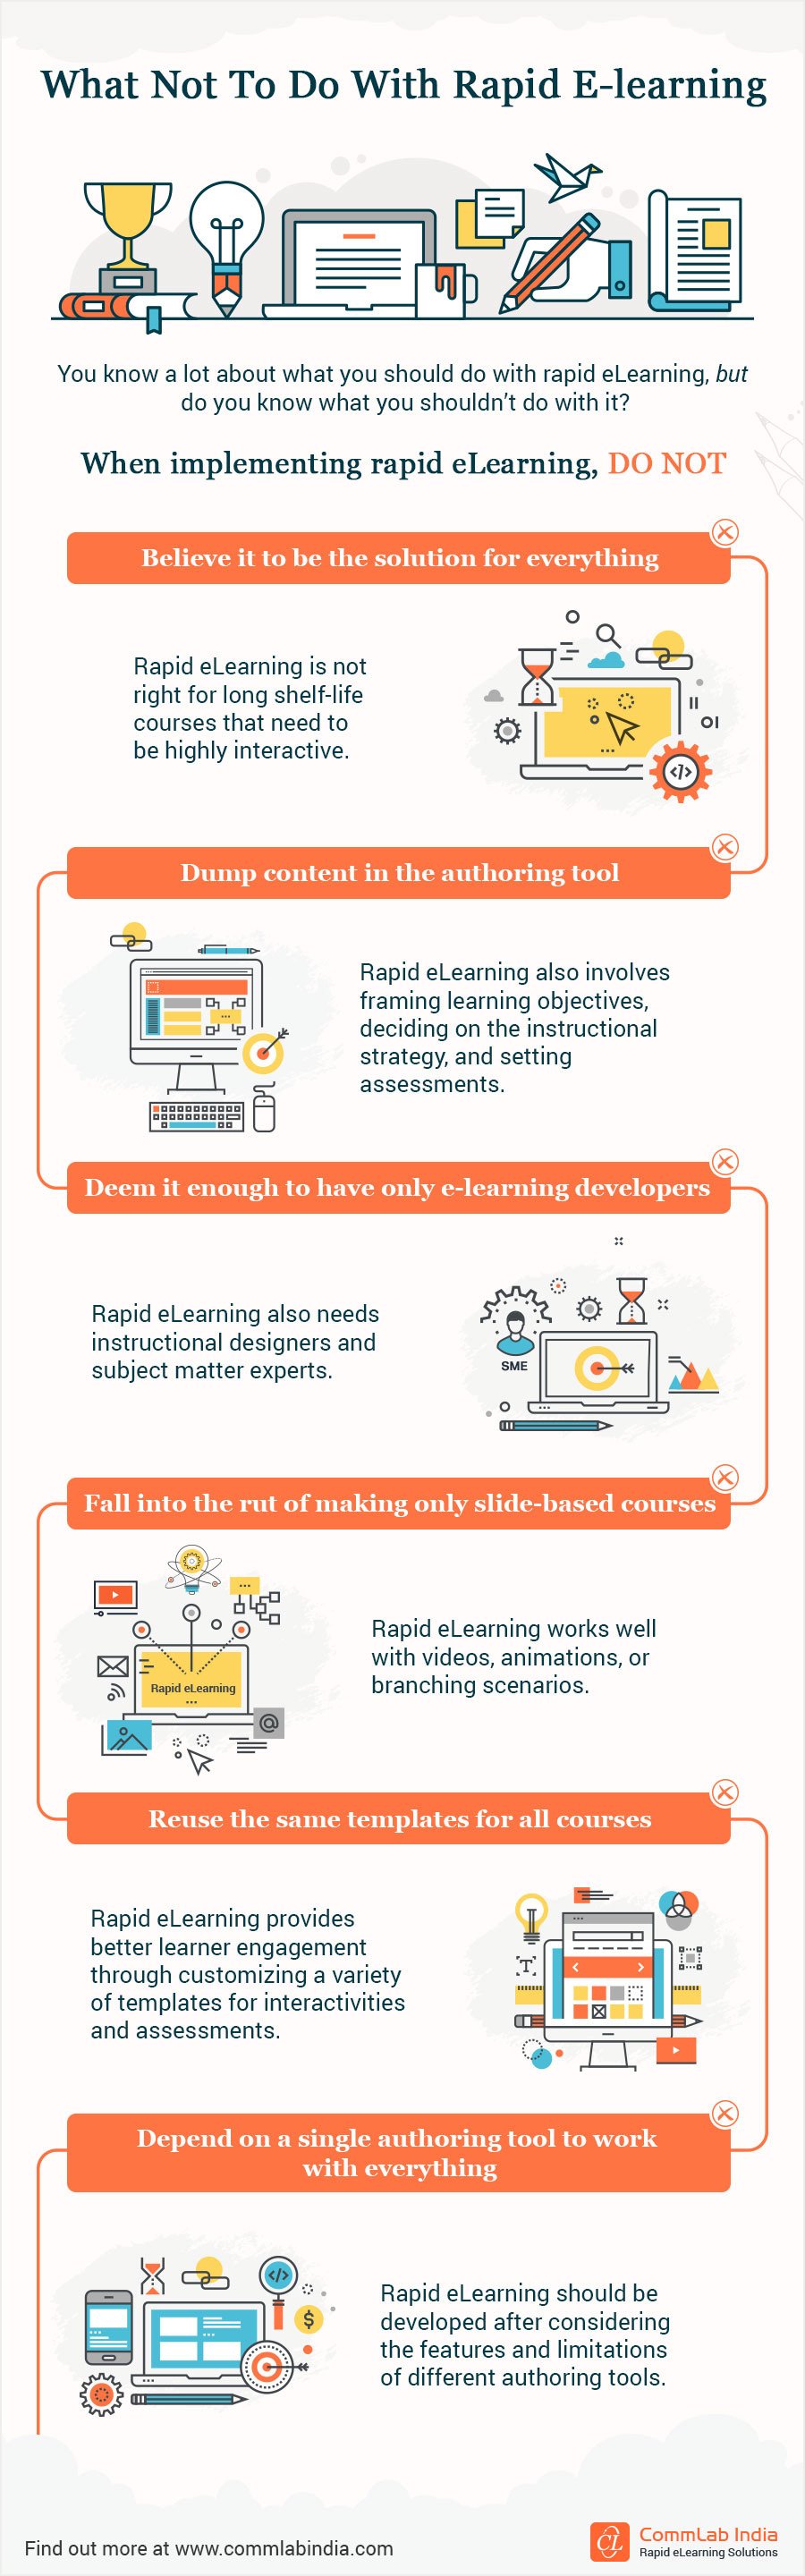 Rapid eLearning Development: What NOT to do